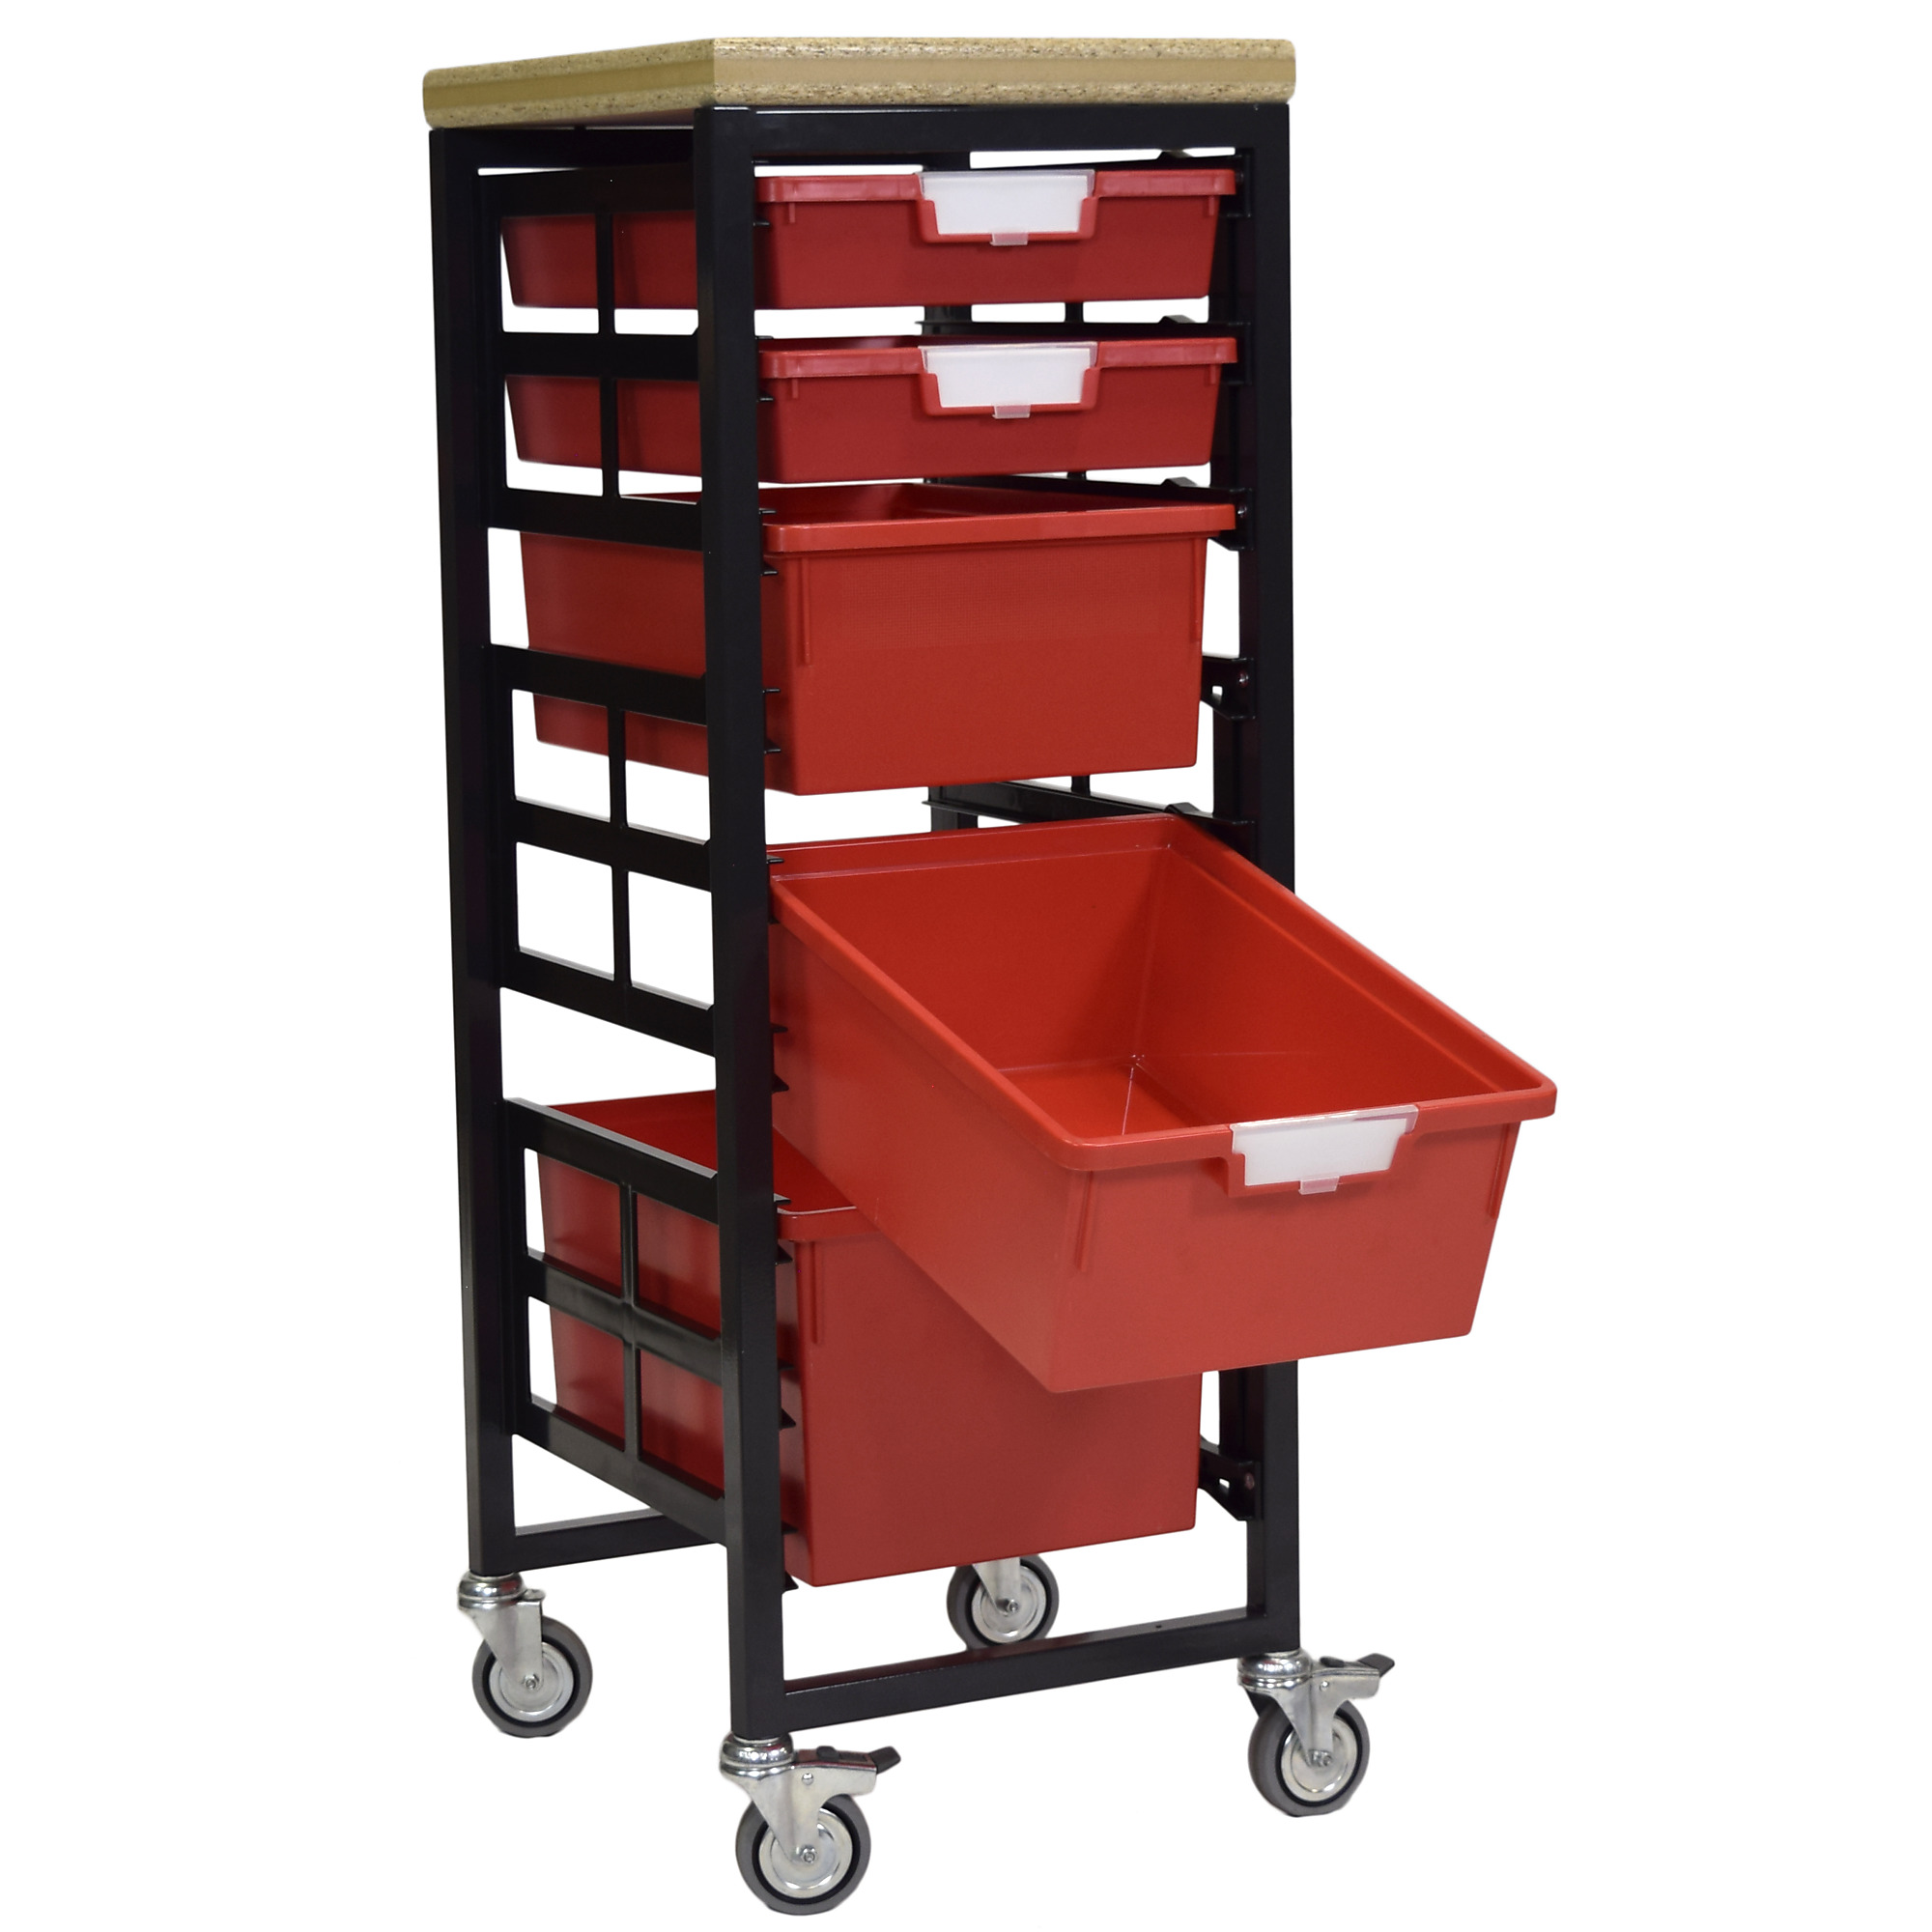 Certwood StorWerks, Mobile Workbench Station w/Wood Top -5 Trays-Red, Included (qty.) 5, Material Plastic, Height 3 in, Model CE2097DGGC-2S2D1TPR